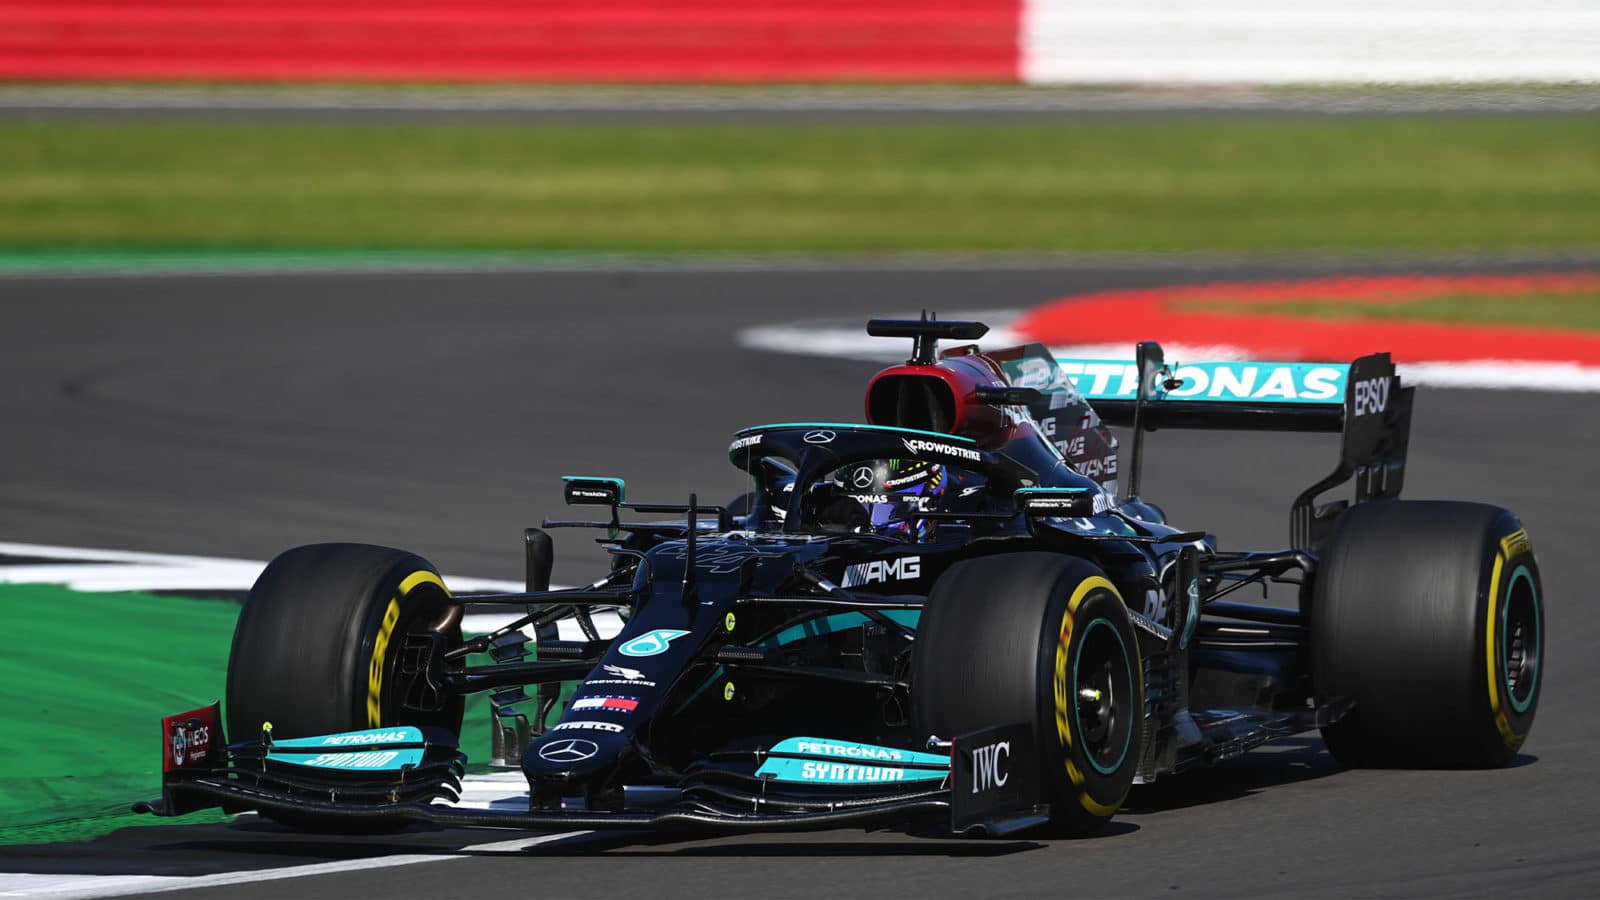 NORTHAMPTON, ENGLAND - JULY 18: Lewis Hamilton of Great Britain driving the (44) Mercedes AMG Petronas F1 Team Mercedes W12 during the F1 Grand Prix of Great Britain at Silverstone on July 18, 2021 in Northampton, England. (Photo by Michael Regan/Getty Images)